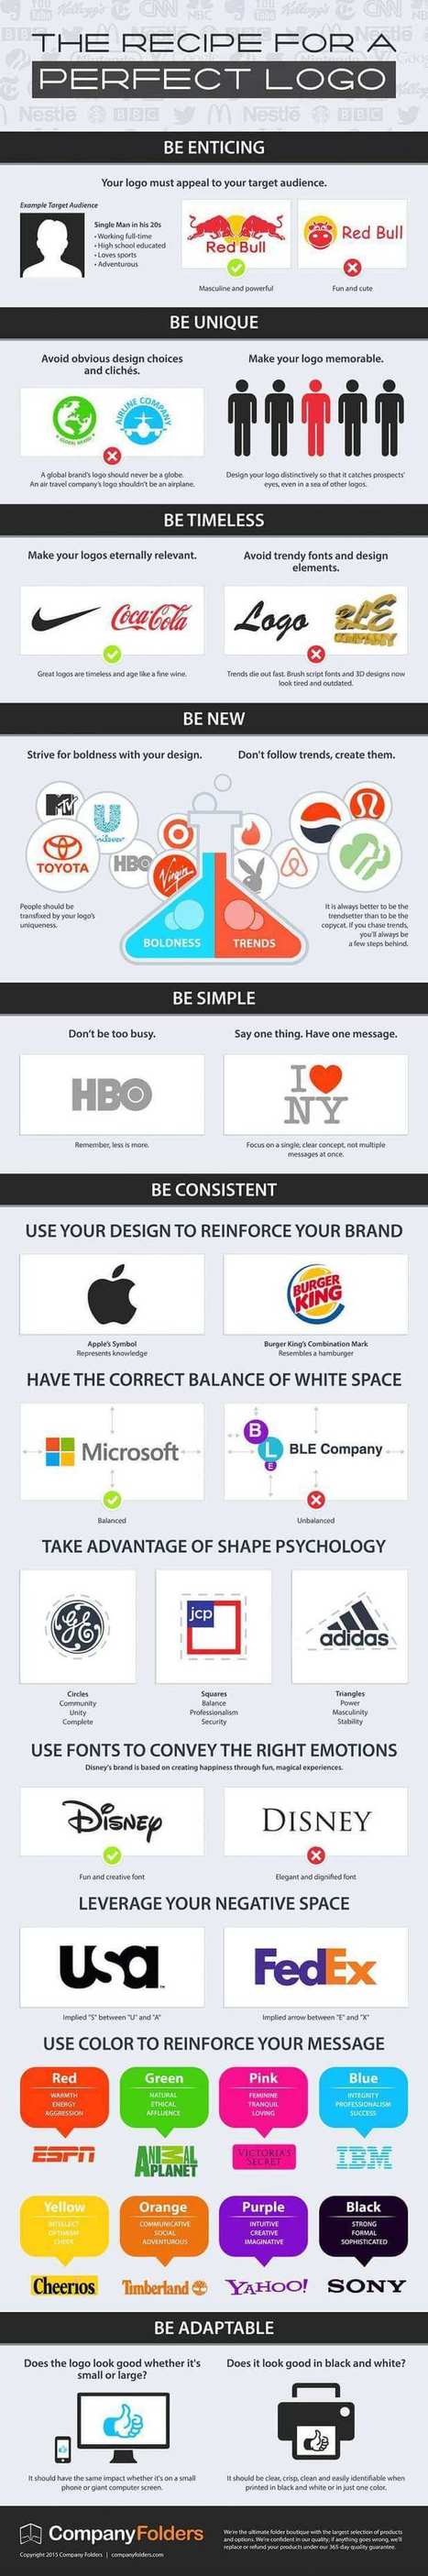 The Recipe for a Perfect Logo [INFOGRAPHIC] | Latest Social Media News | Scoop.it